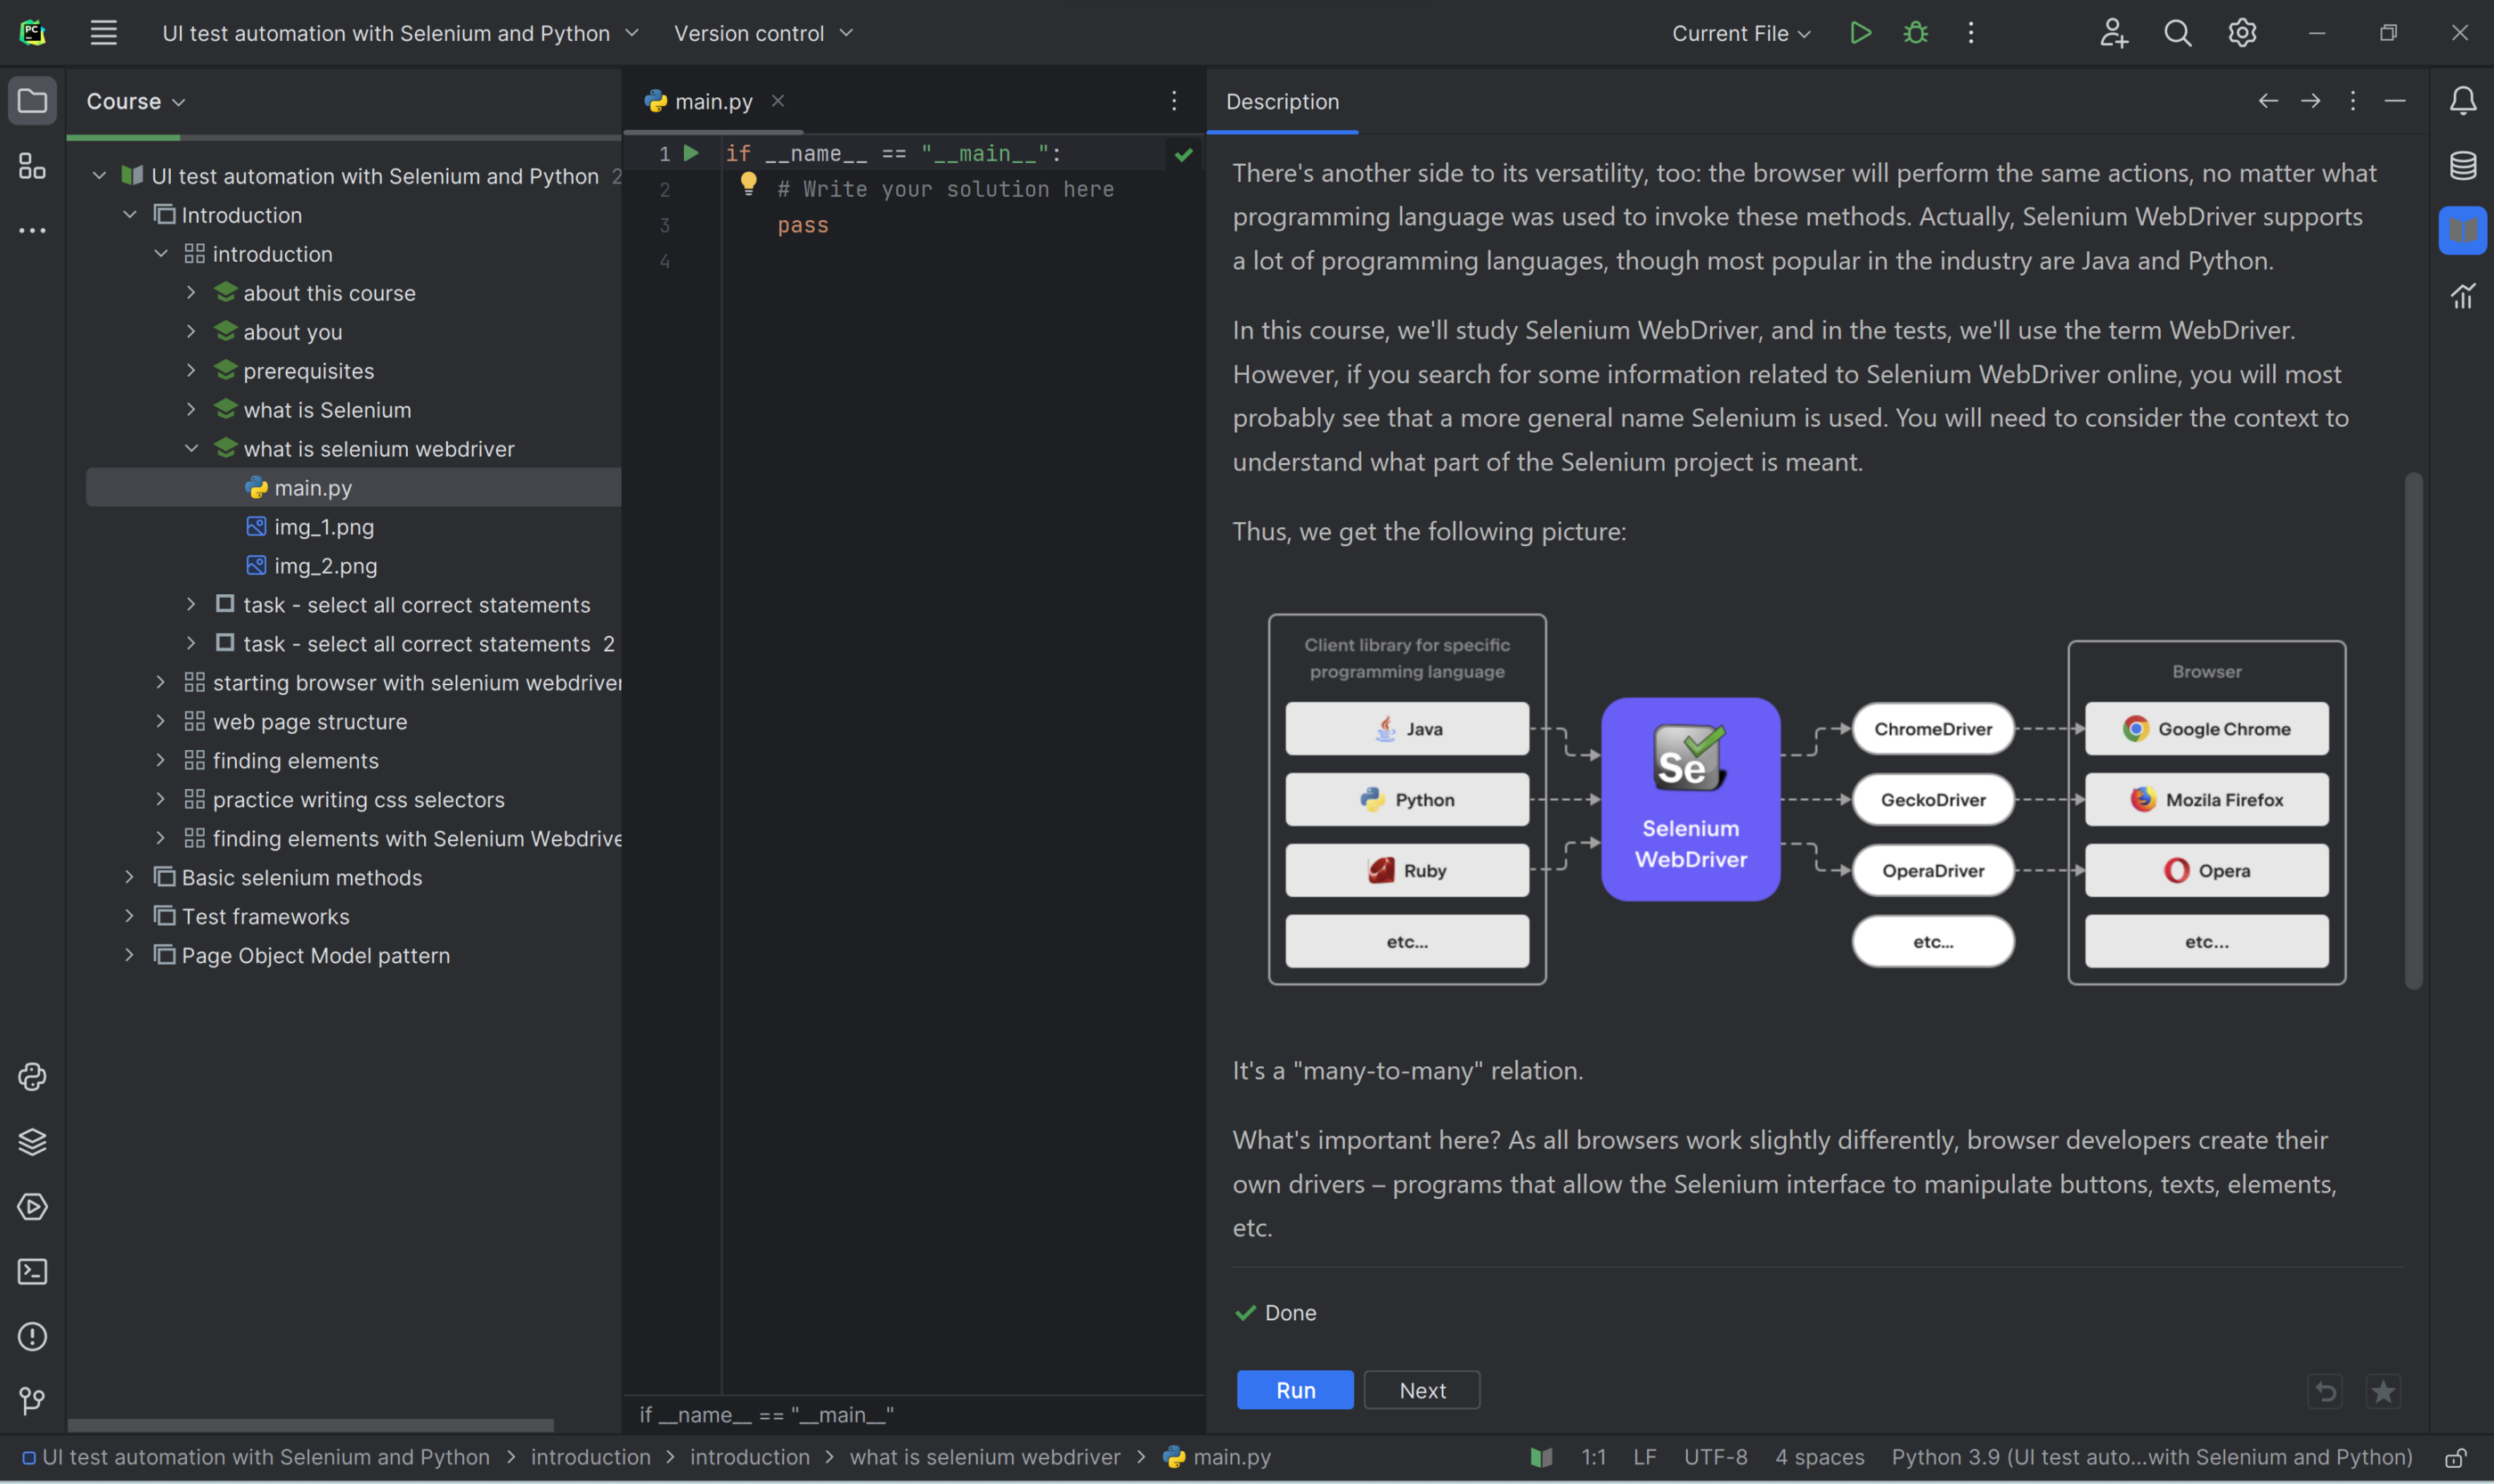 A screenshot of a lesson on the selenium webdriver em,bedded in an IDE